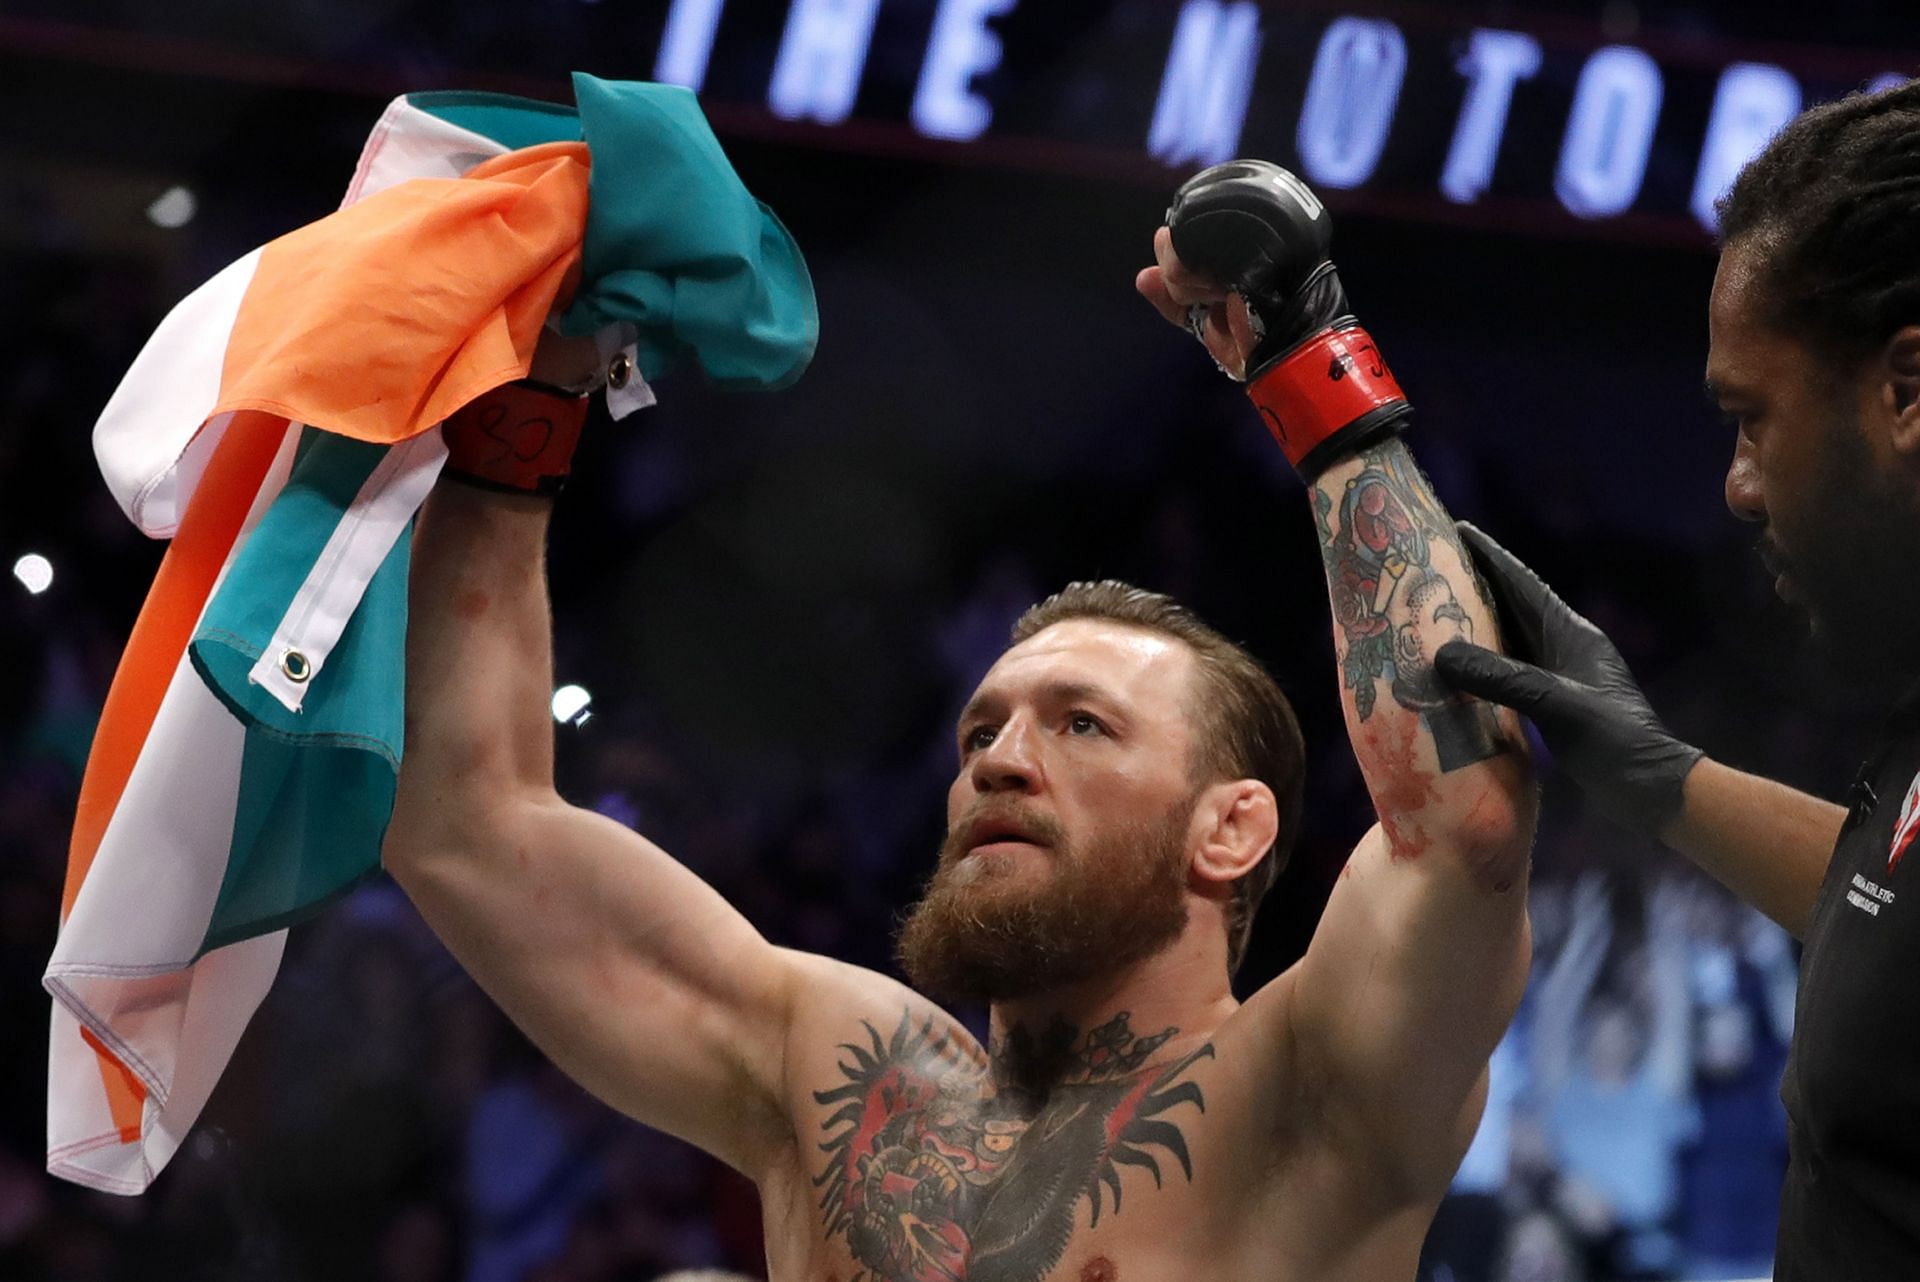 Conor McGregor has backtracked on his retirement plans on multiple occasions